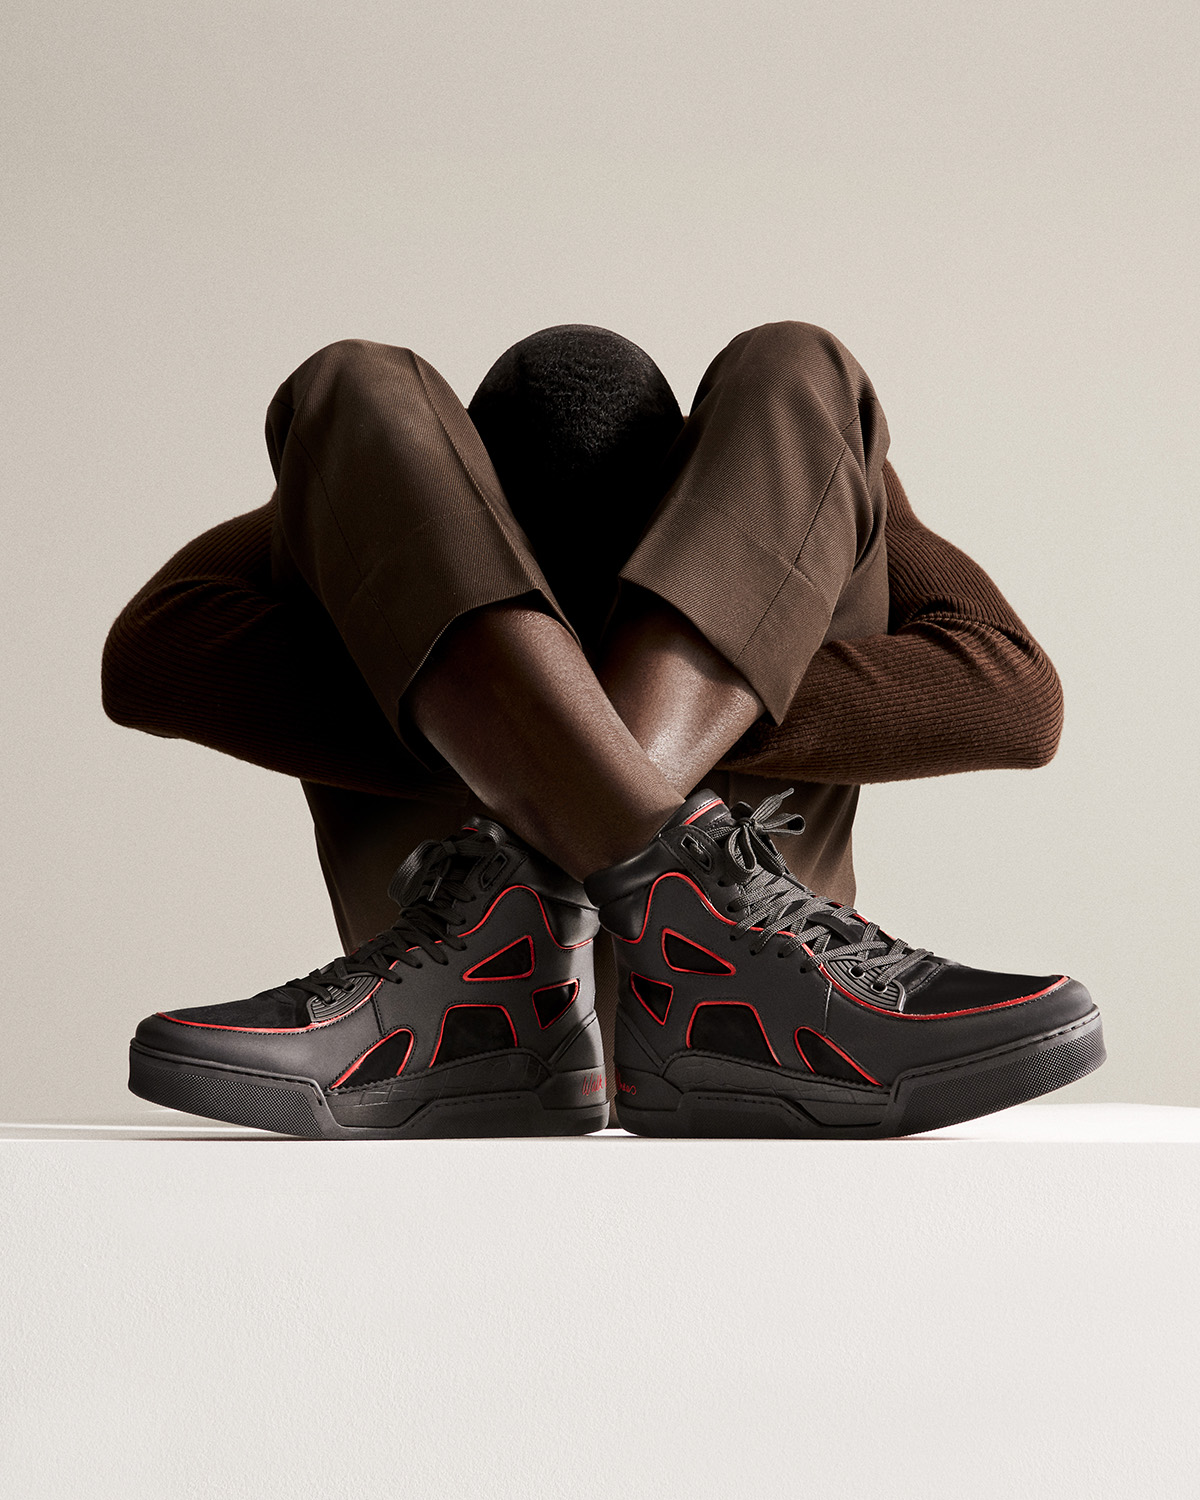 Christian Louboutin launching charity collection with Idris Elba